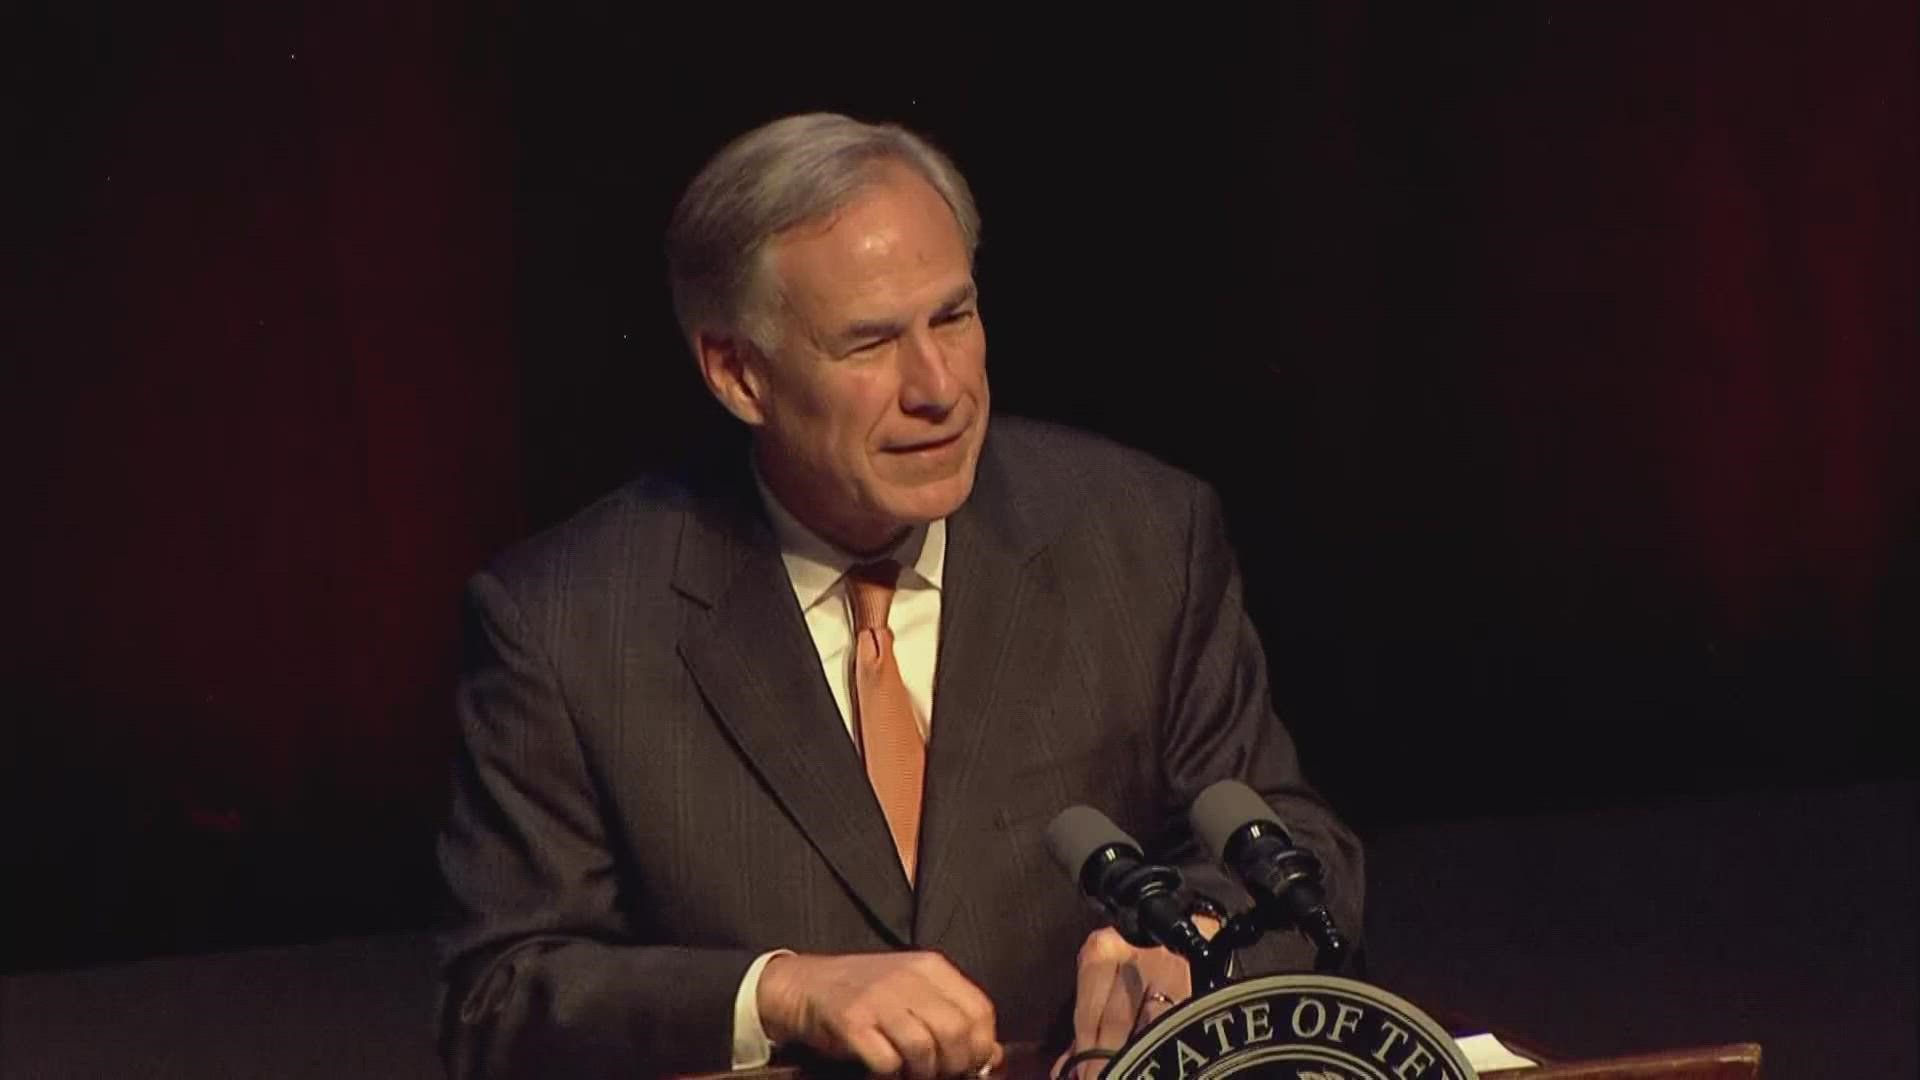 WATCH: The governor is speaking on the state's economic development at a Chamber of Commerce luncheon.